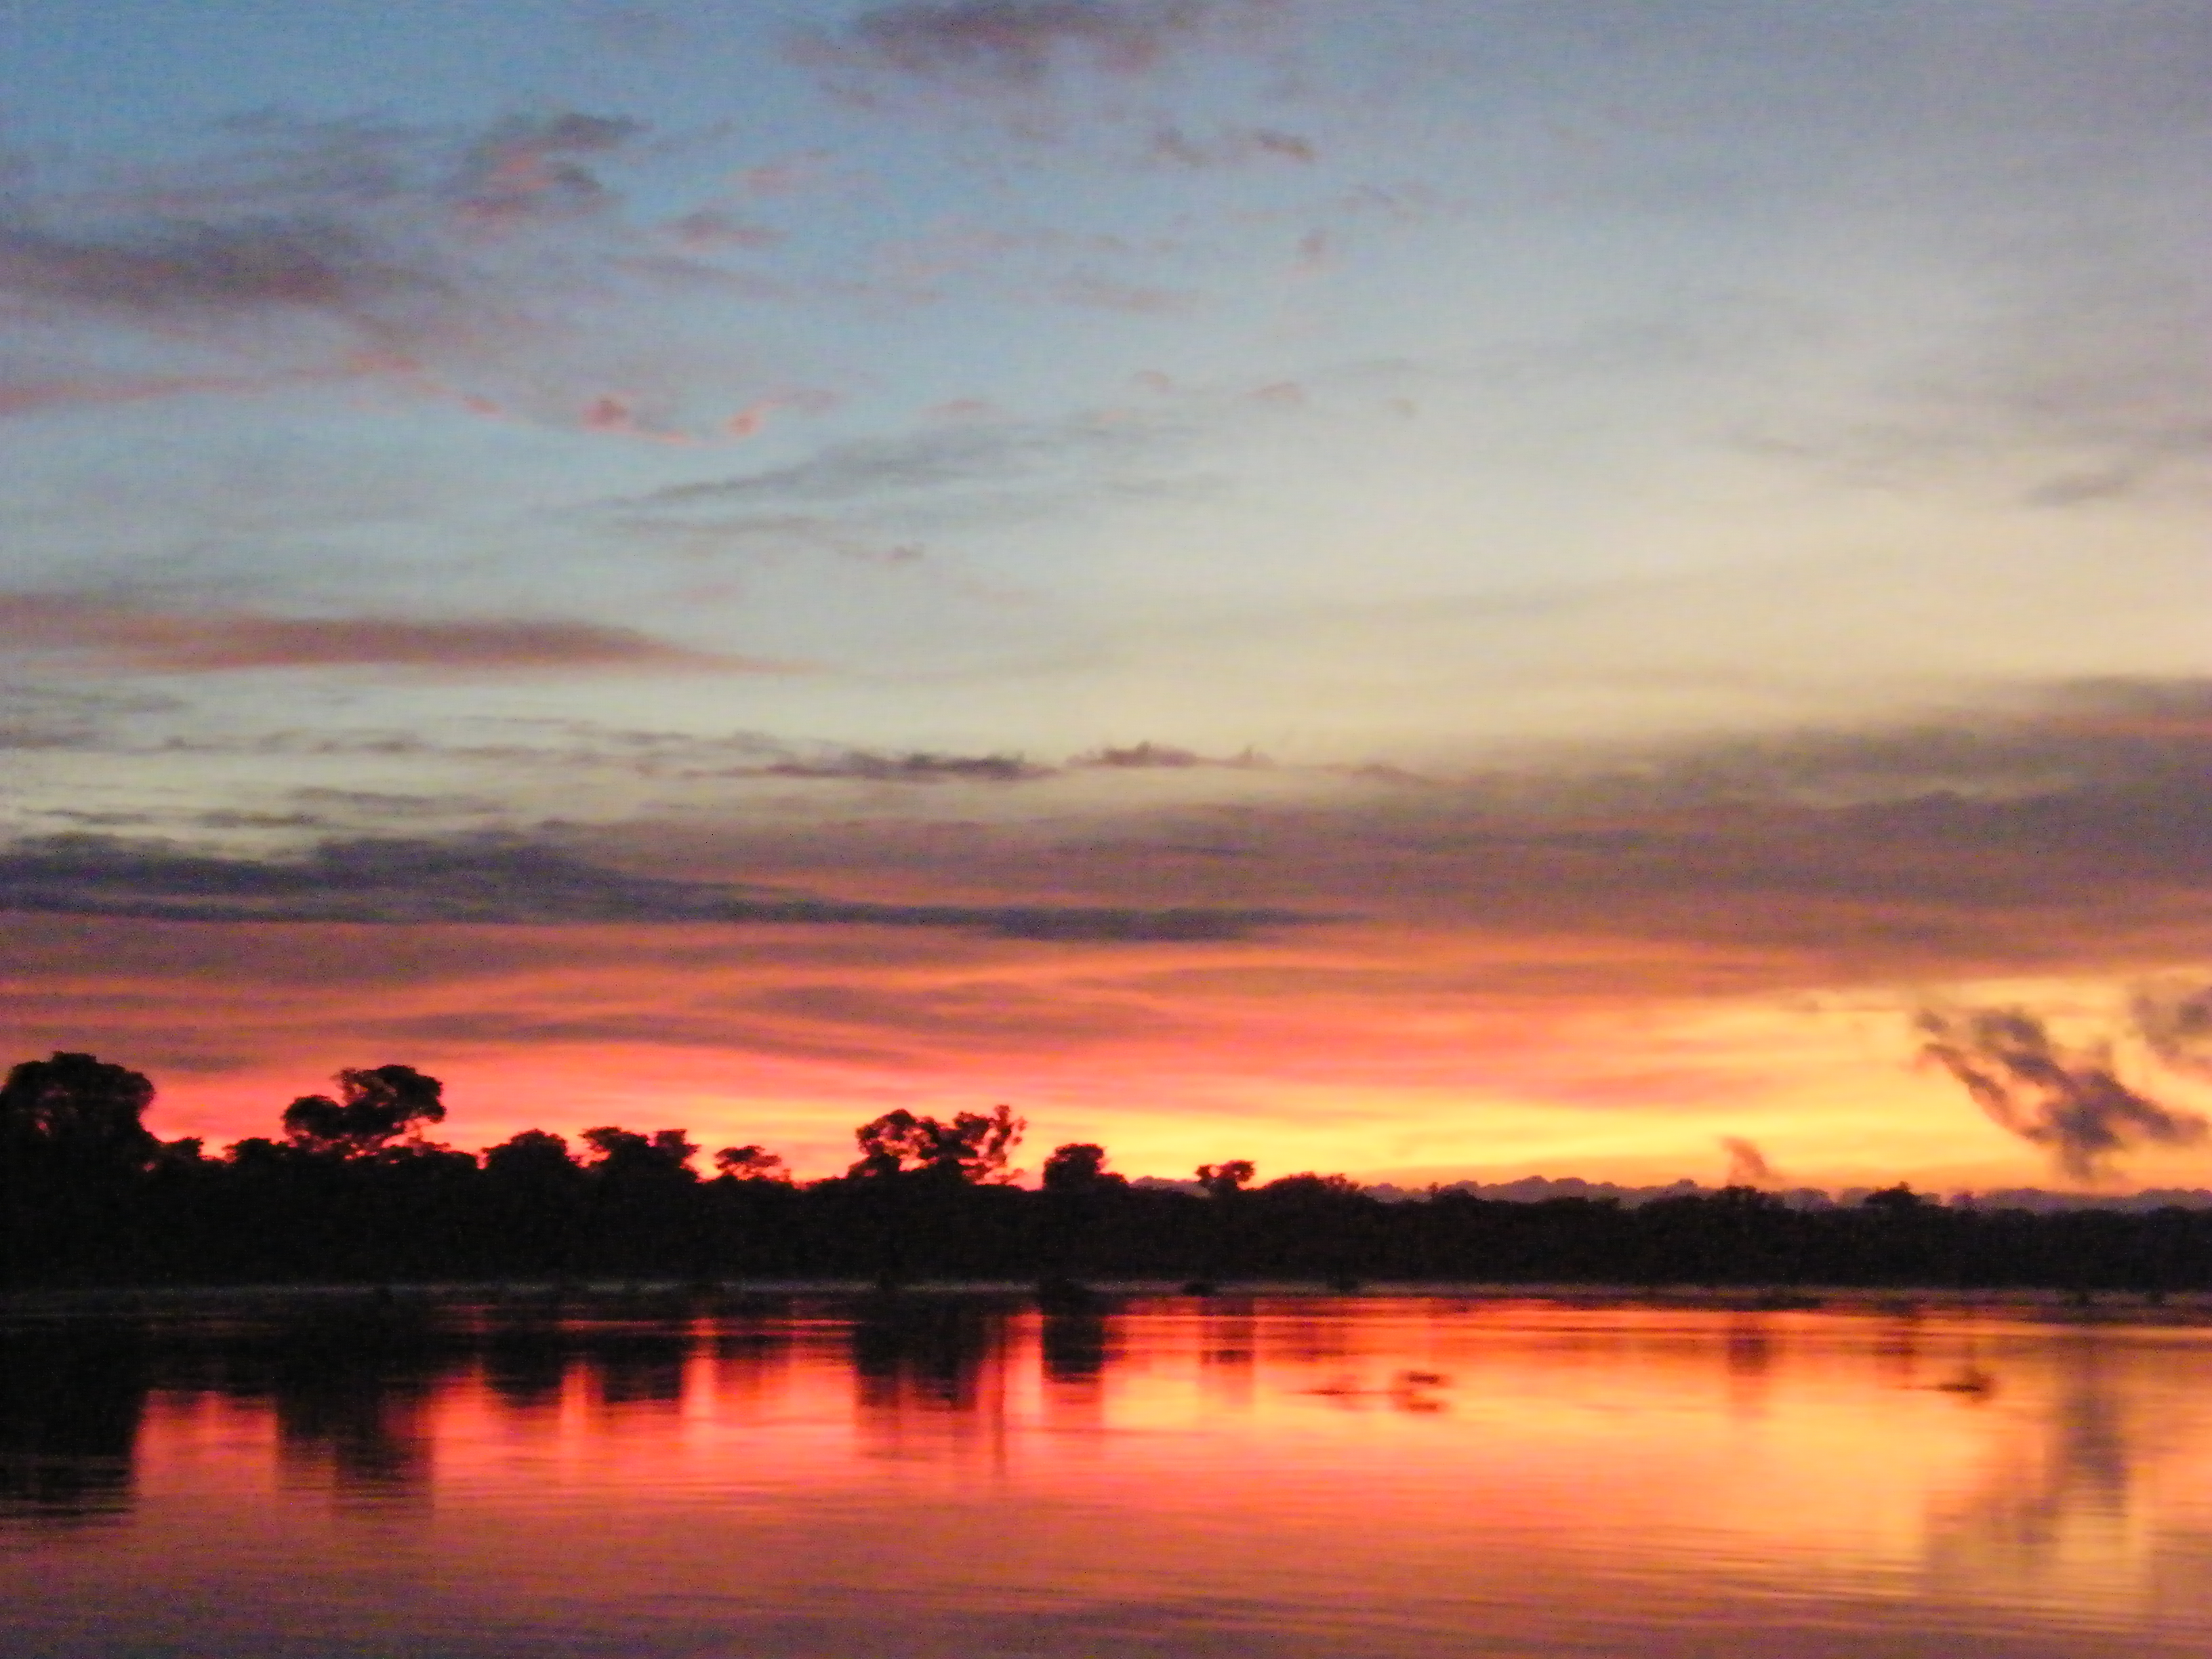 Sunrise on the Paraguay River